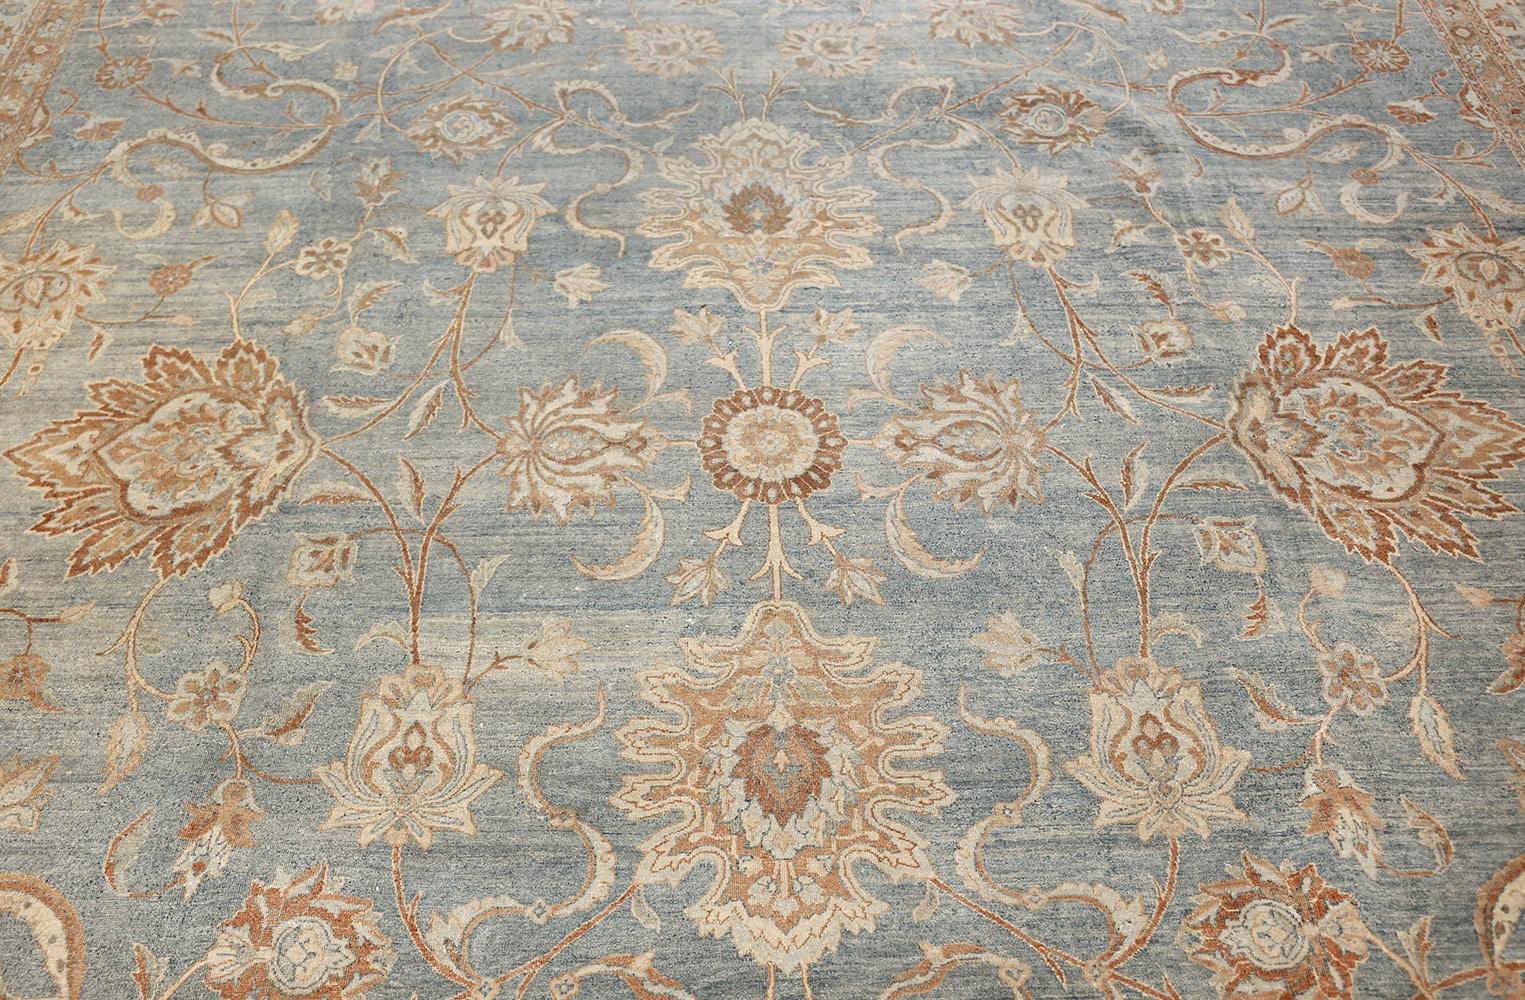 Antique Sky Blue Persian Kerman Carpet. 10 ft 9 in x 20 ft In Excellent Condition For Sale In New York, NY